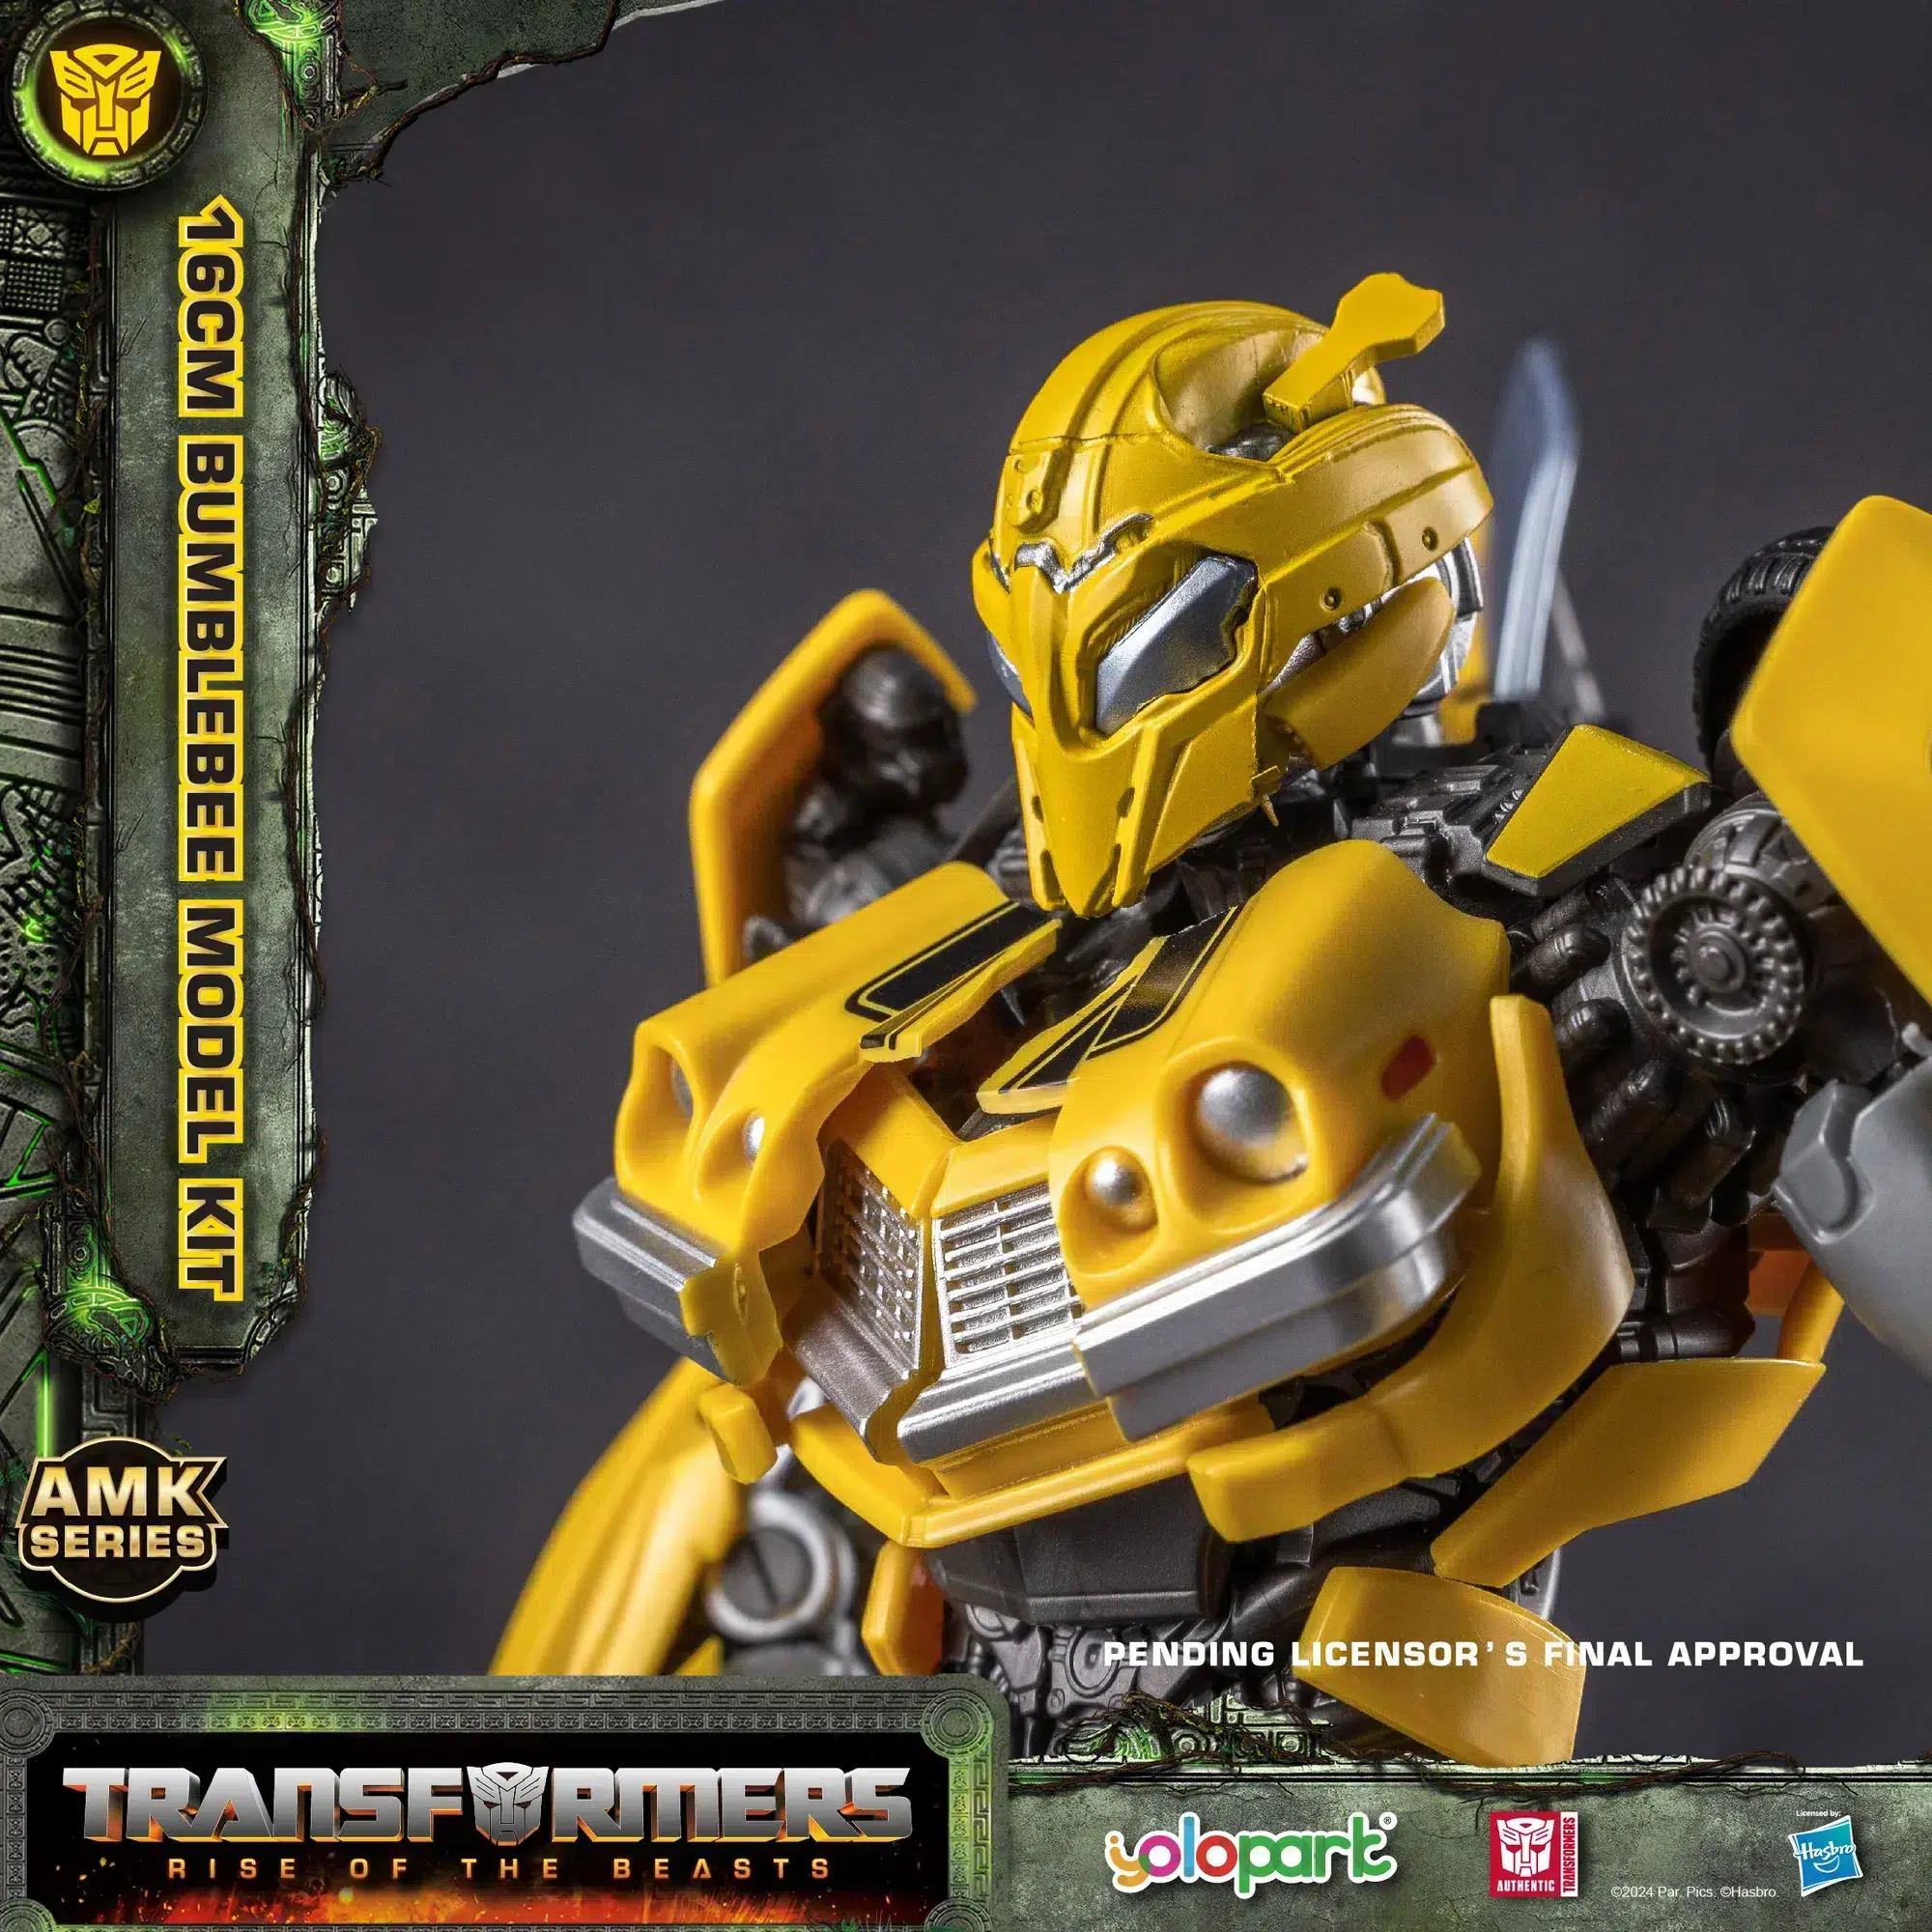 Yolopark Amk Series Transformers Rise Of The Beasts Cheetor Model Kit 5